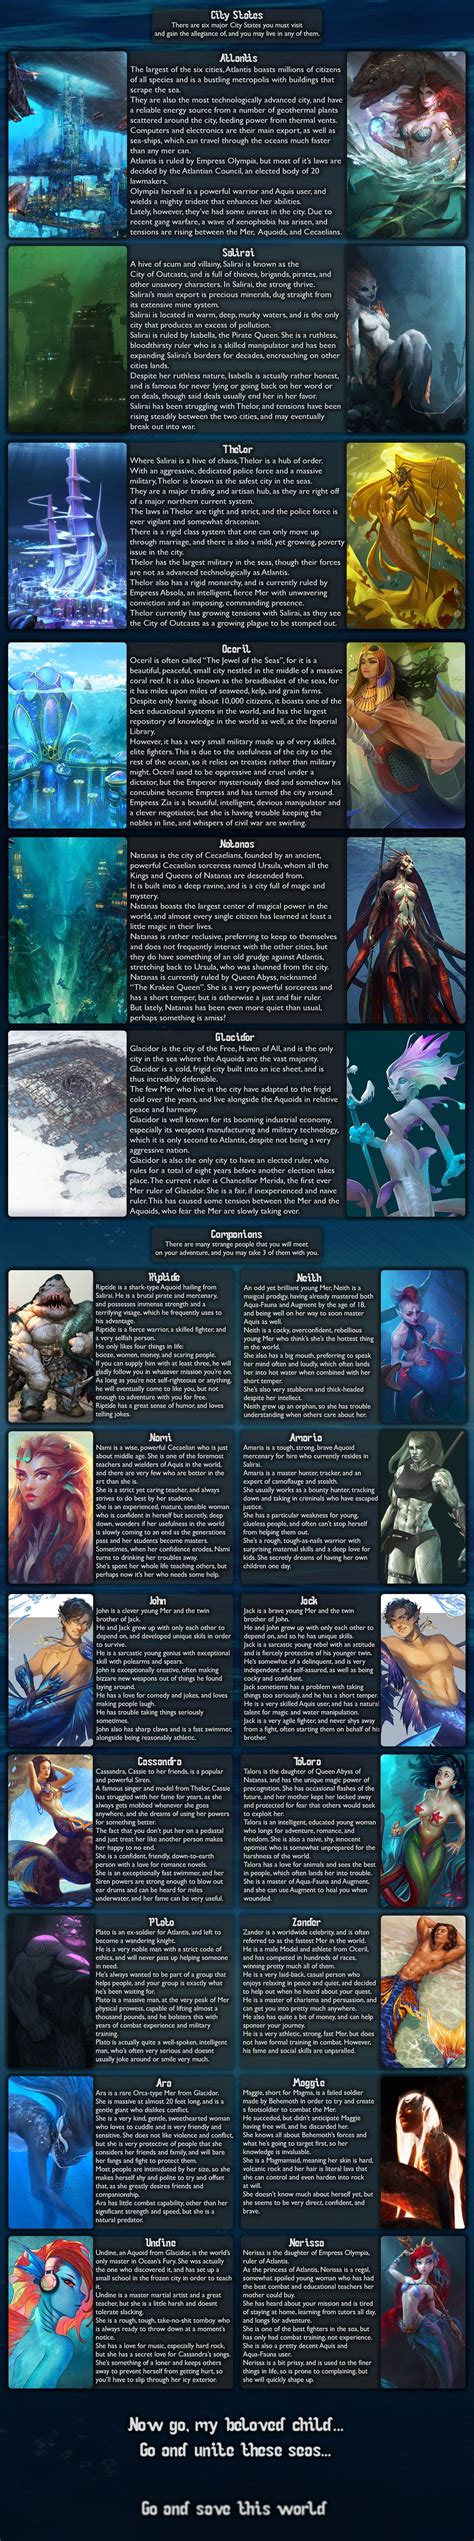 Beneath The Waves Cyoa Create Your Own Adventure Cool Super Powers